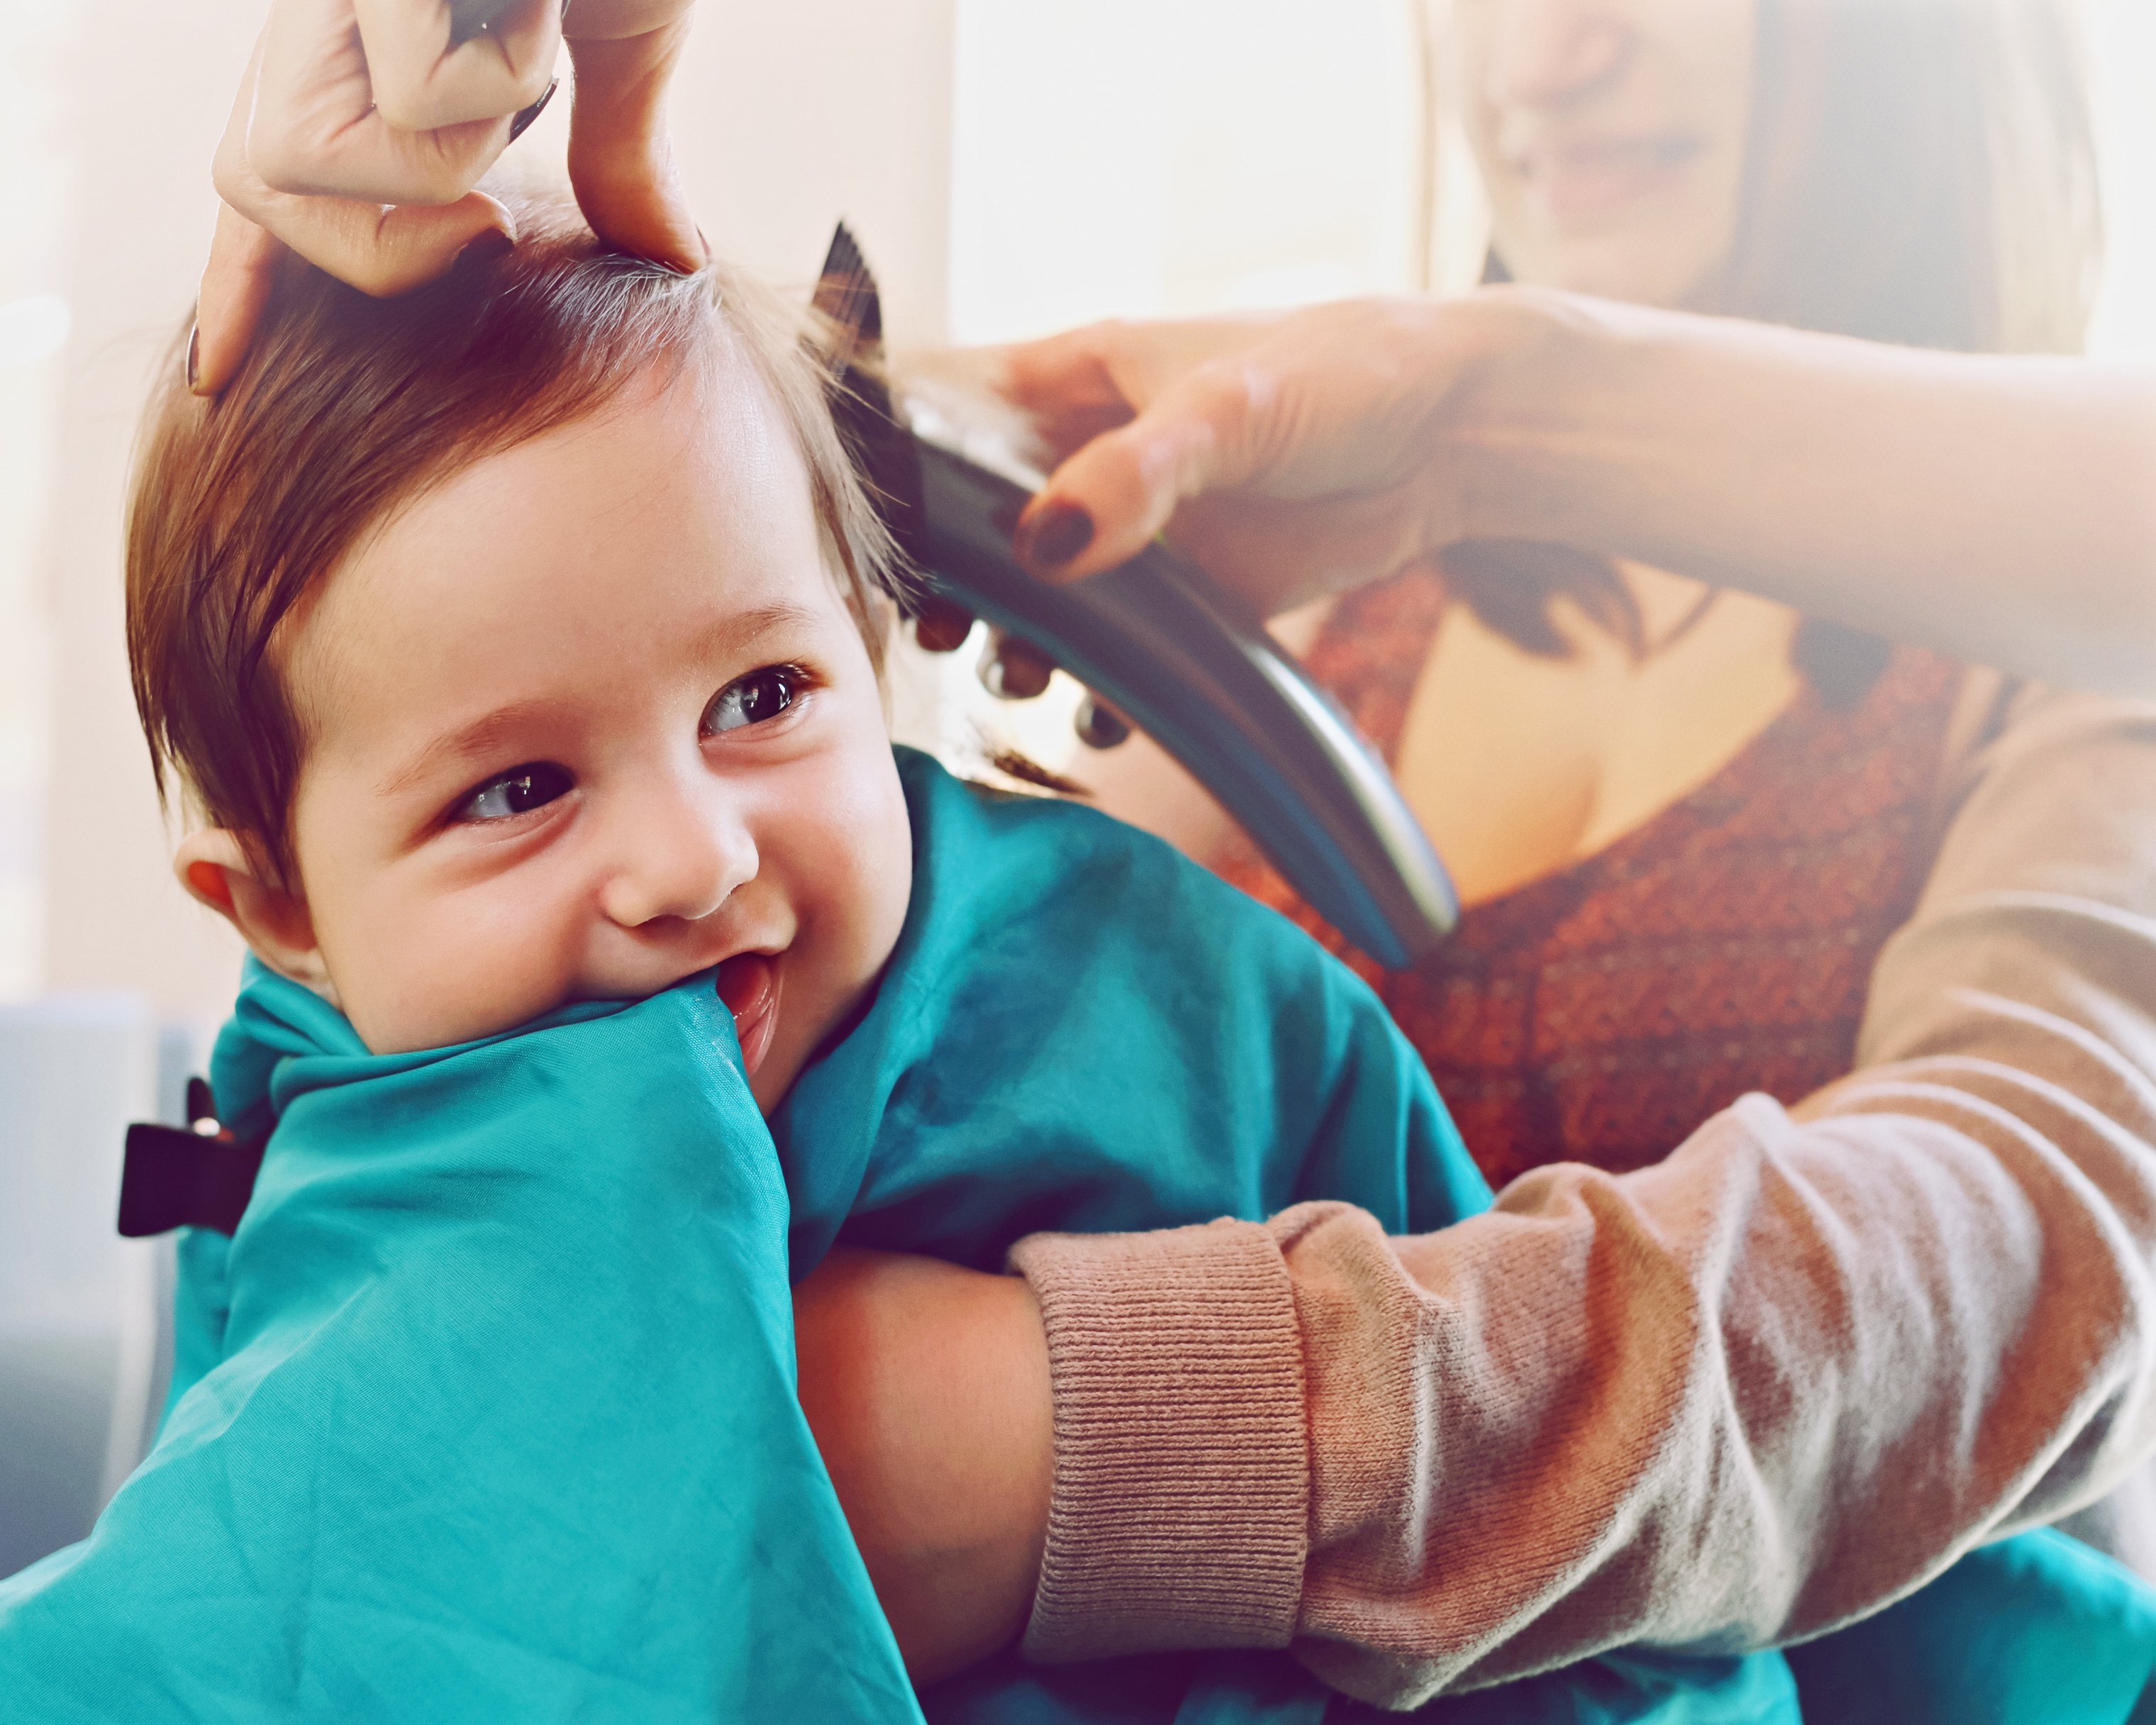 Baby sitting at the hair salon, | Photo: Getty Images